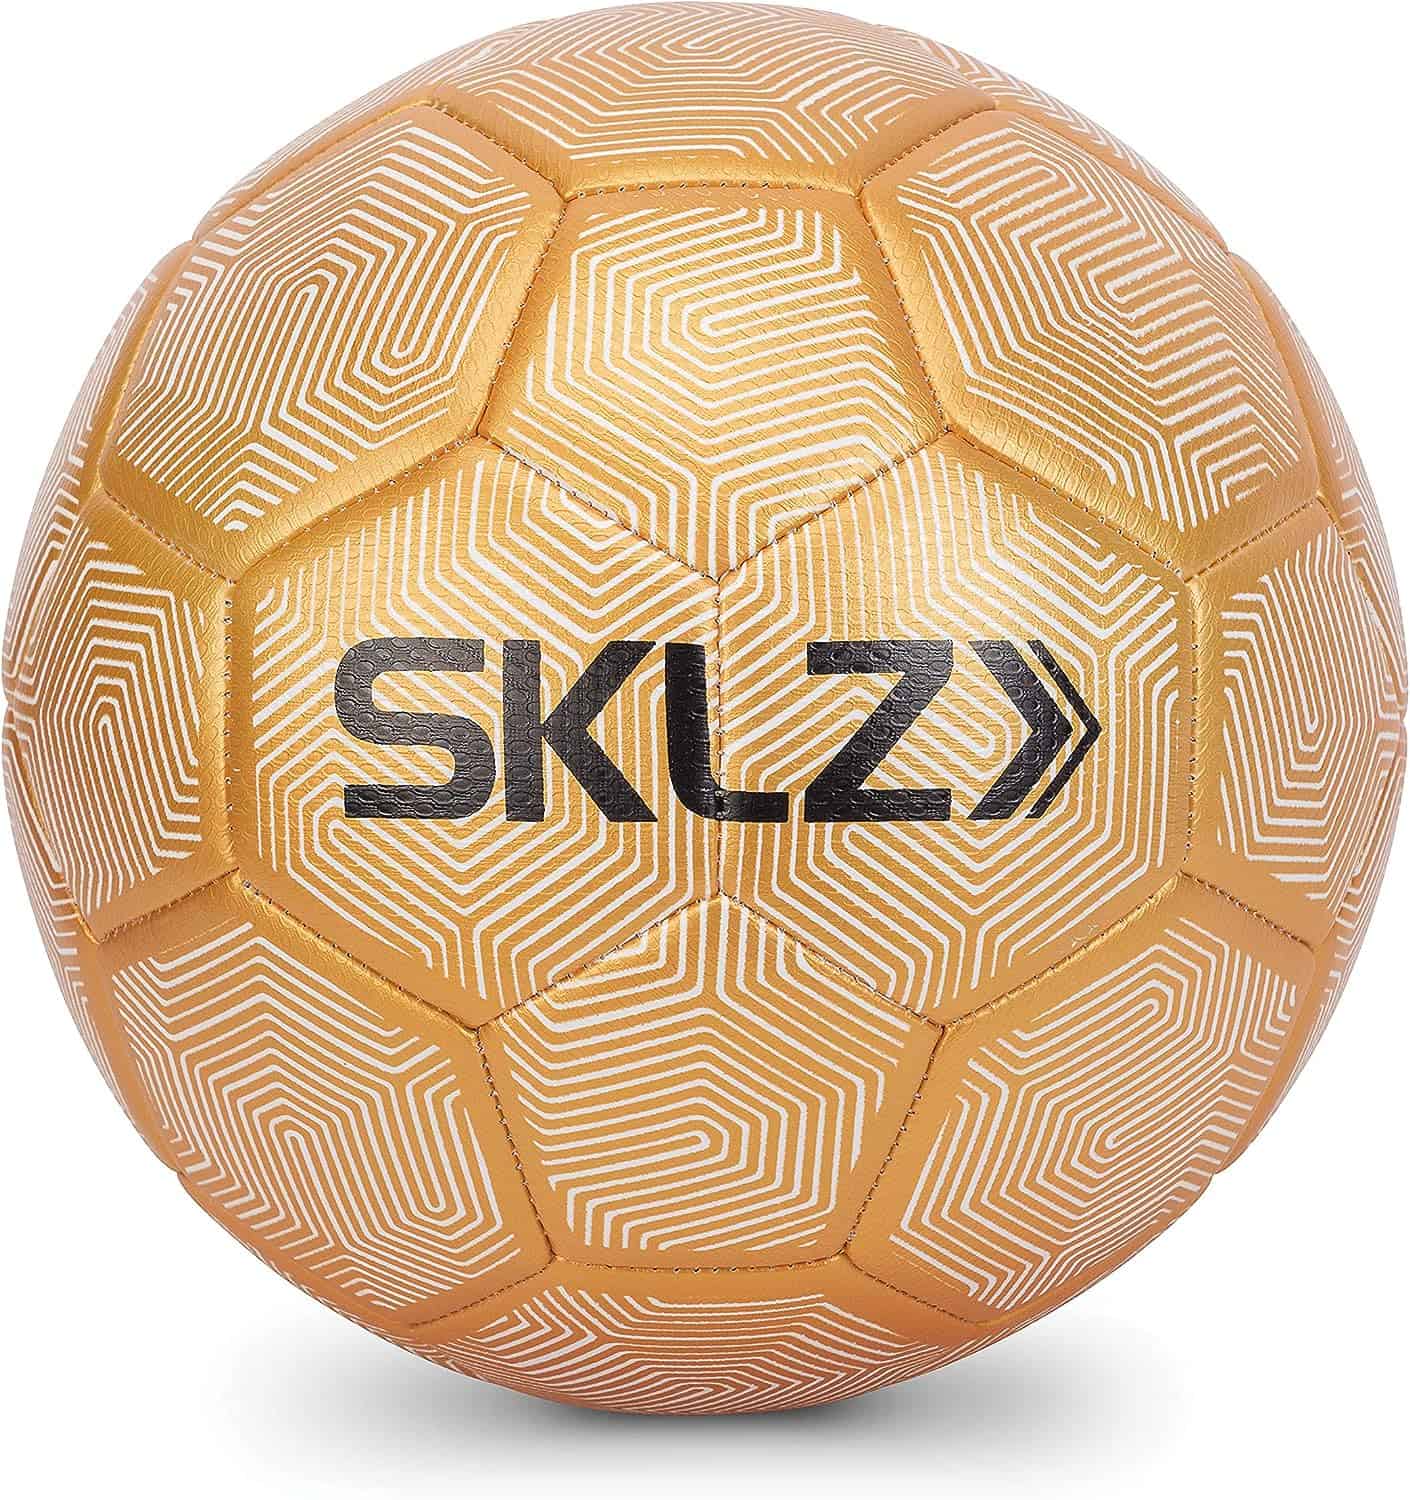 Weighted Soccer Technique Training Ball